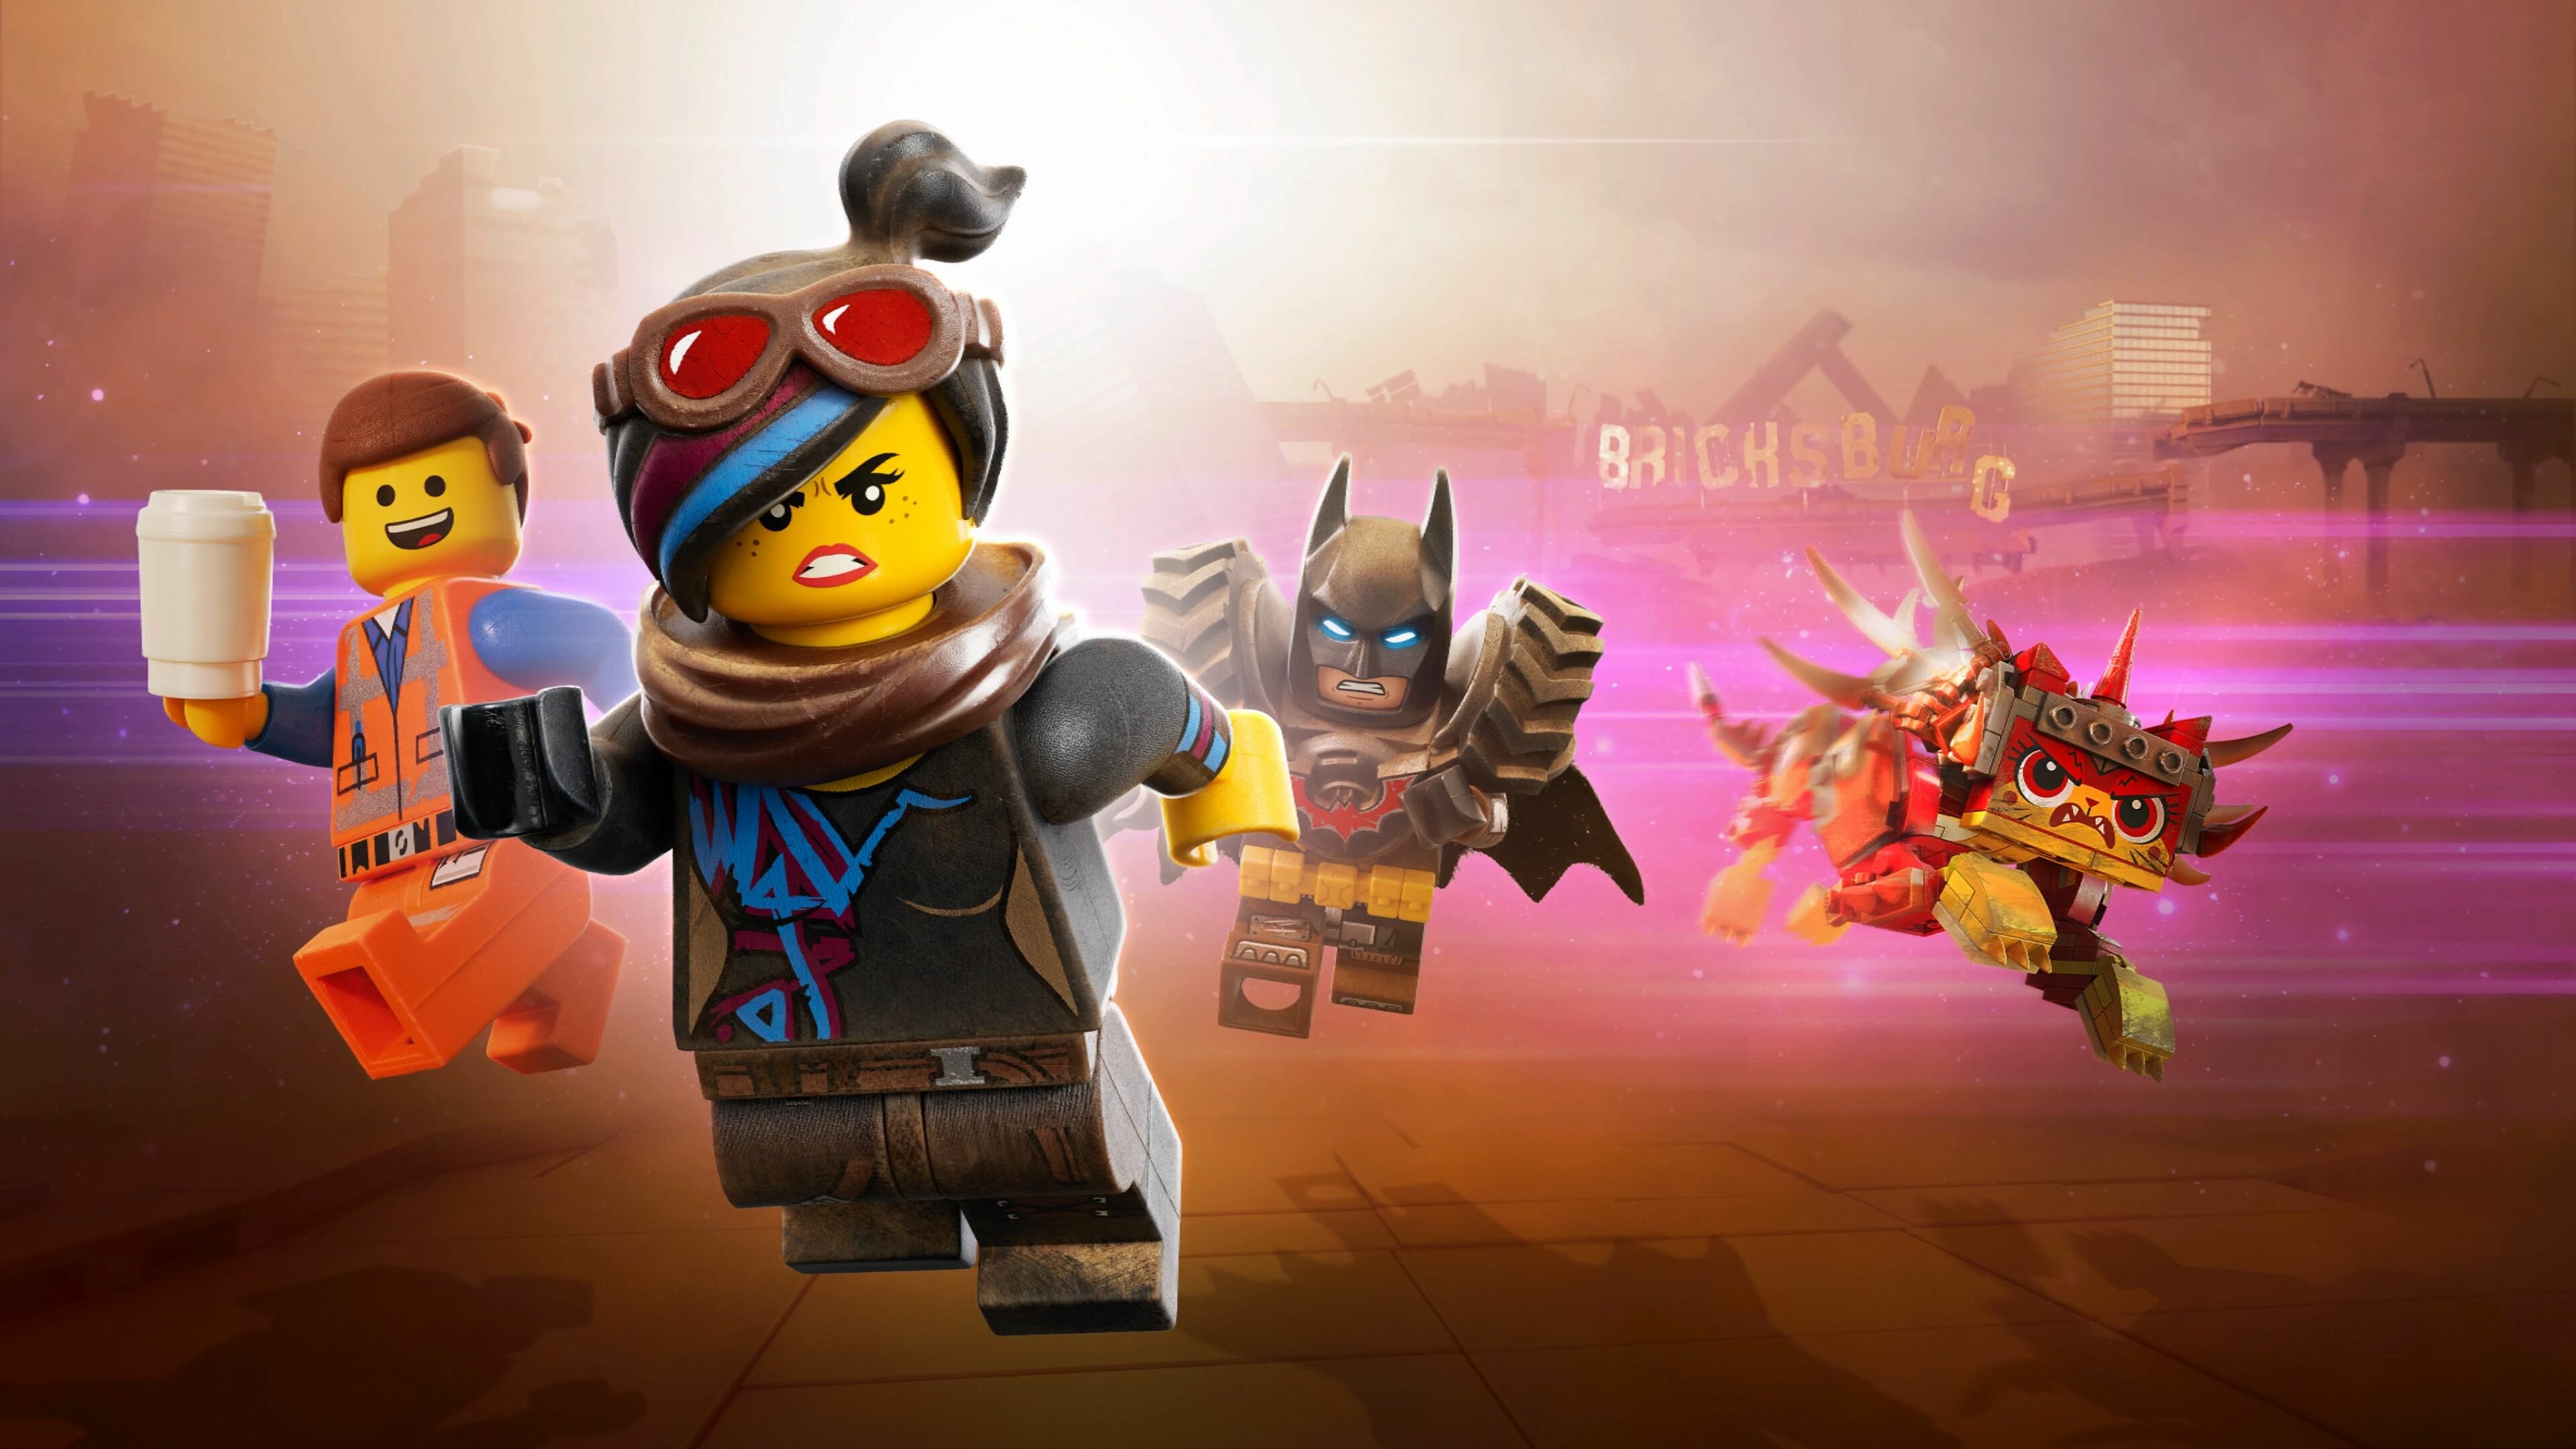 The Lego Movie: The citizens of Bricksburg face a dangerous new threat when Duplo invaders. 3840x2160 4K Wallpaper.